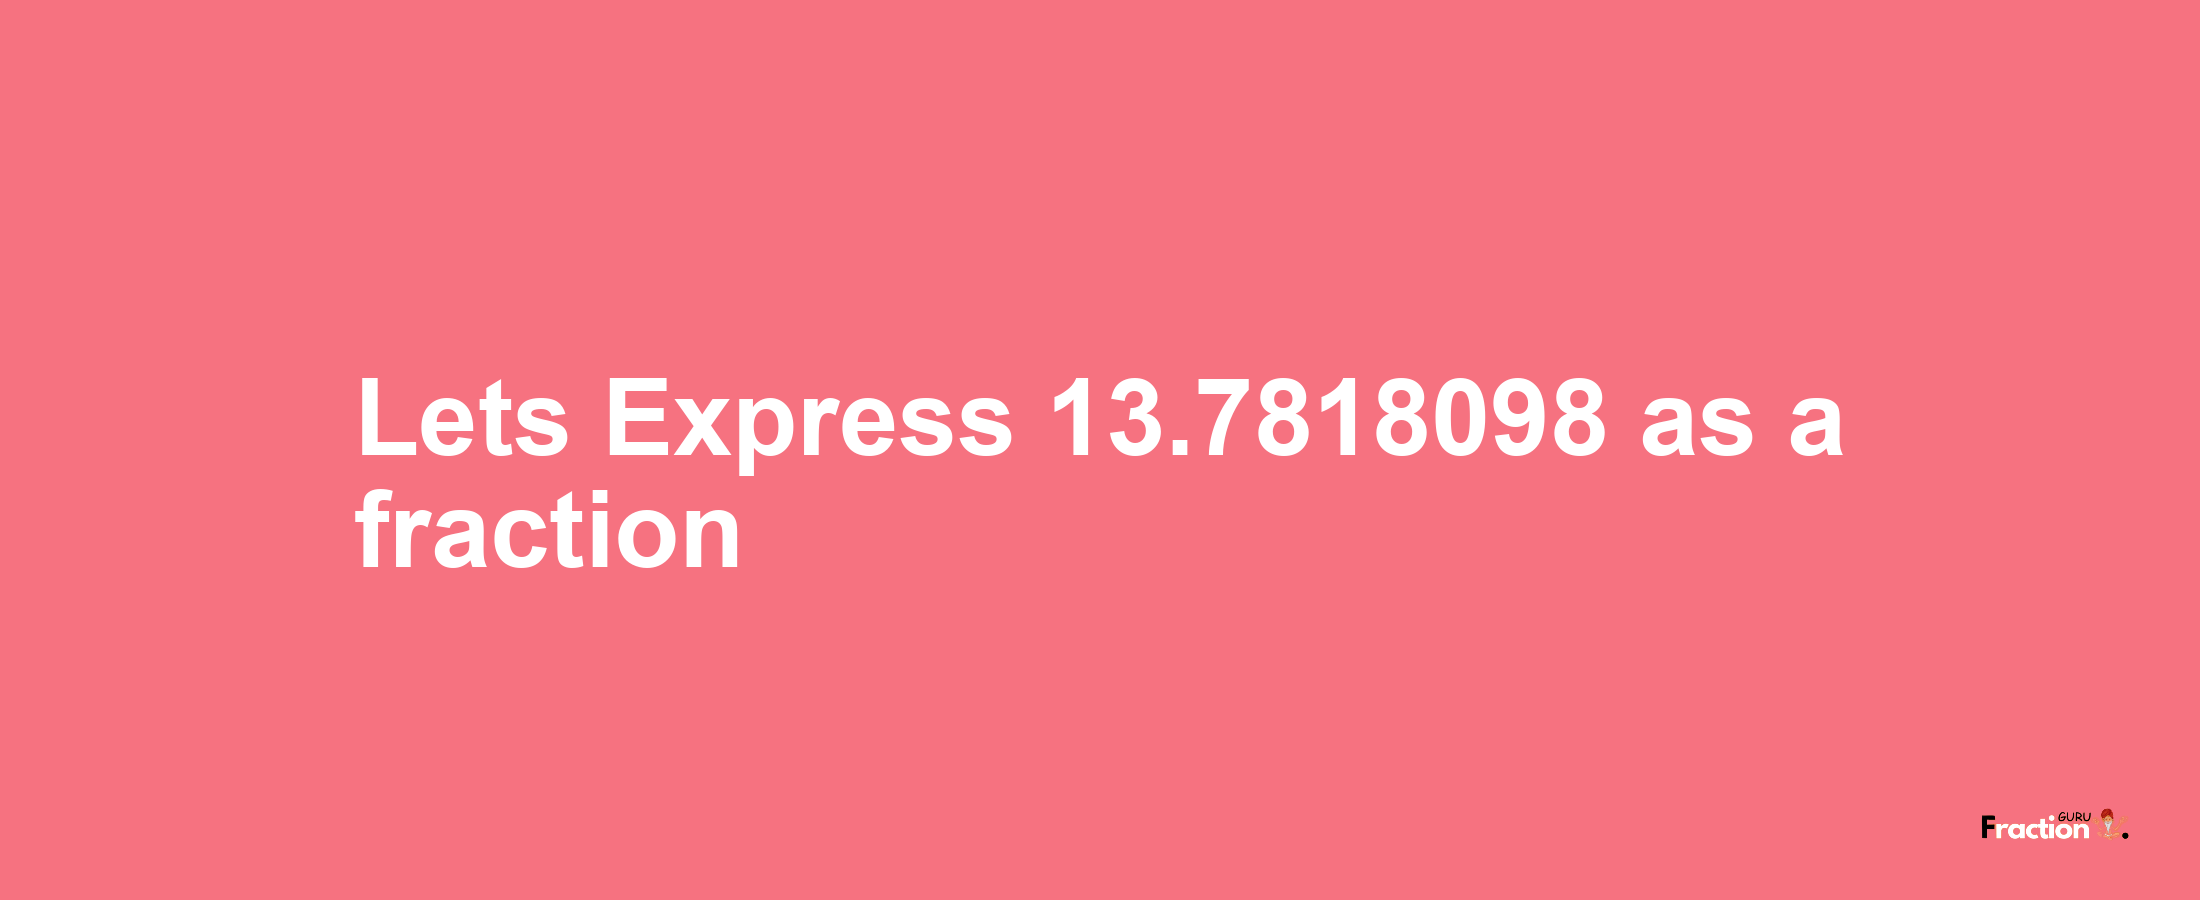 Lets Express 13.7818098 as afraction